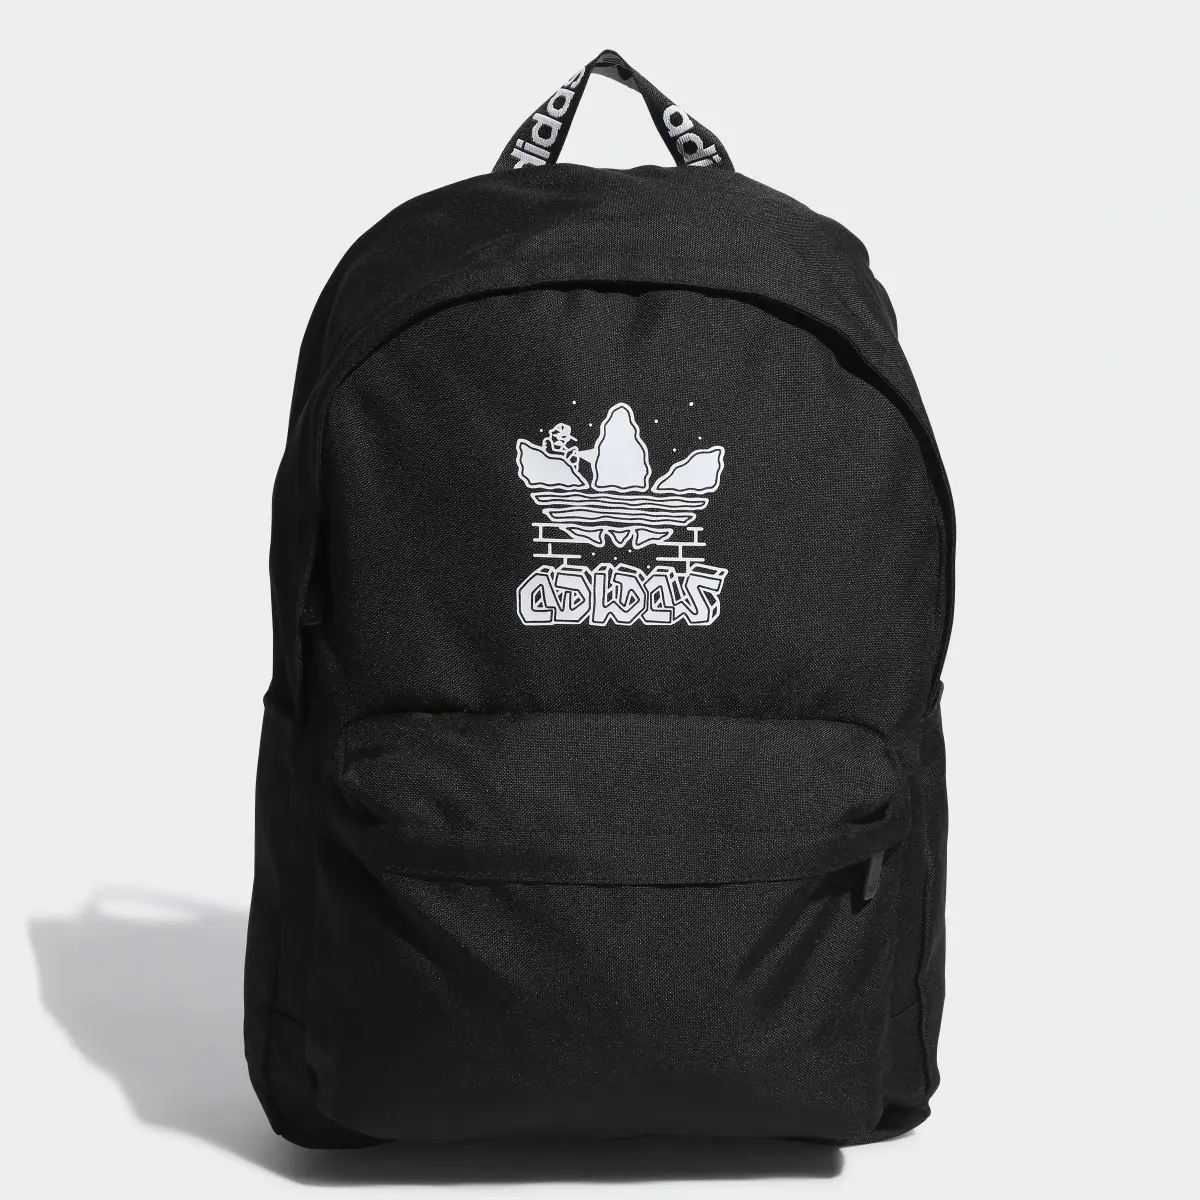 Adidas Trefoil Classic Backpack. 1